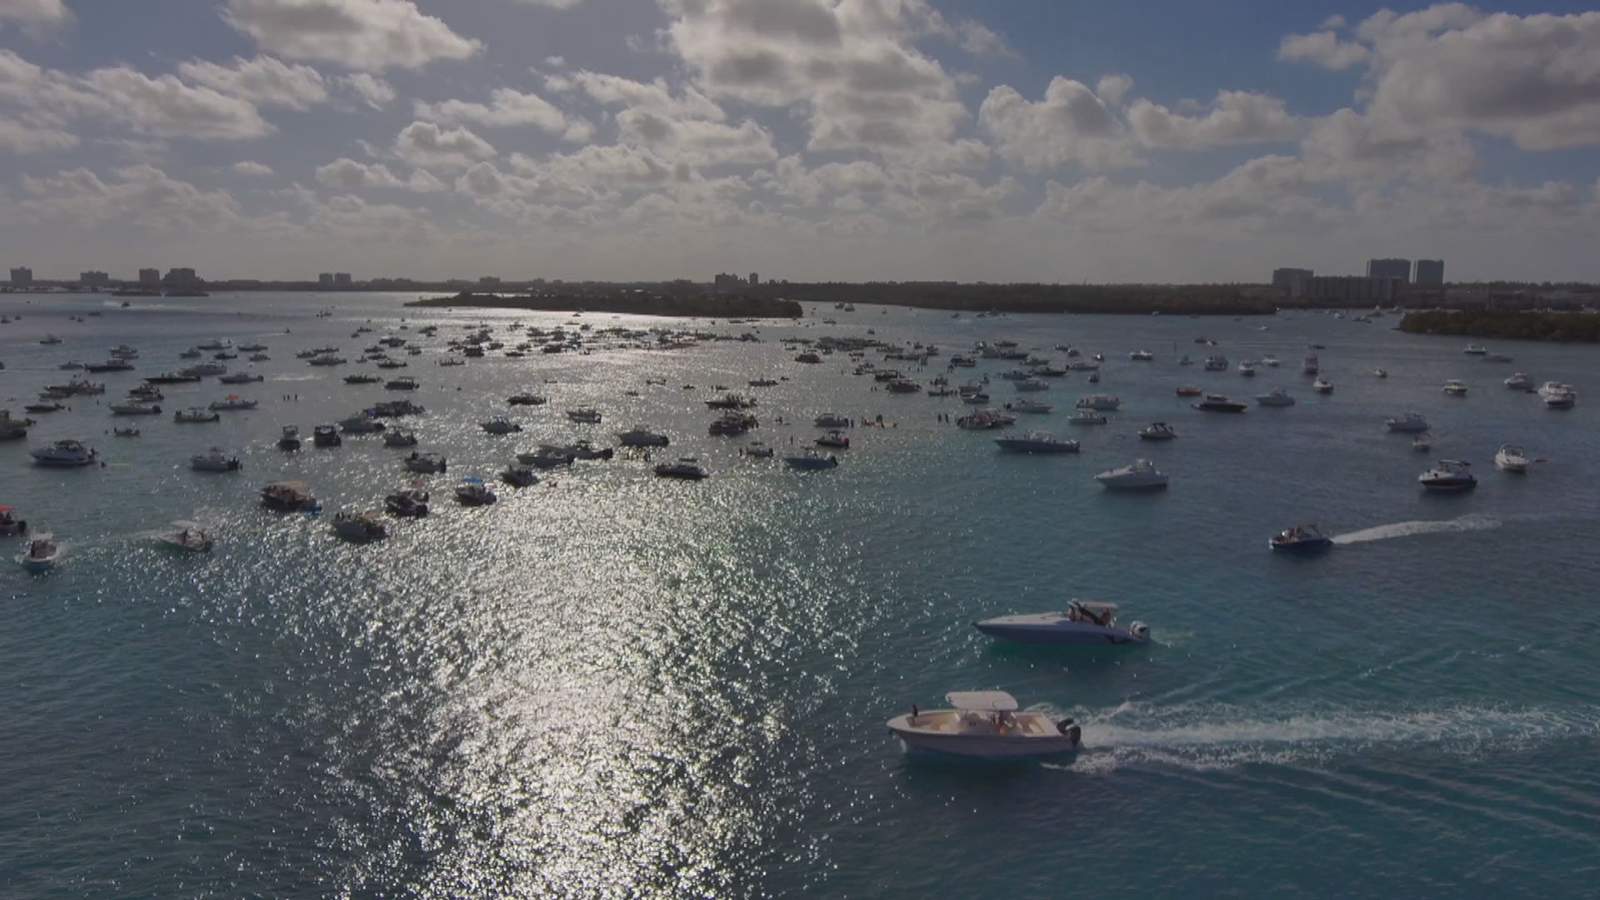 WATCH: Drone video captures hundreds of boaters partying in midst of coronavirus crisis